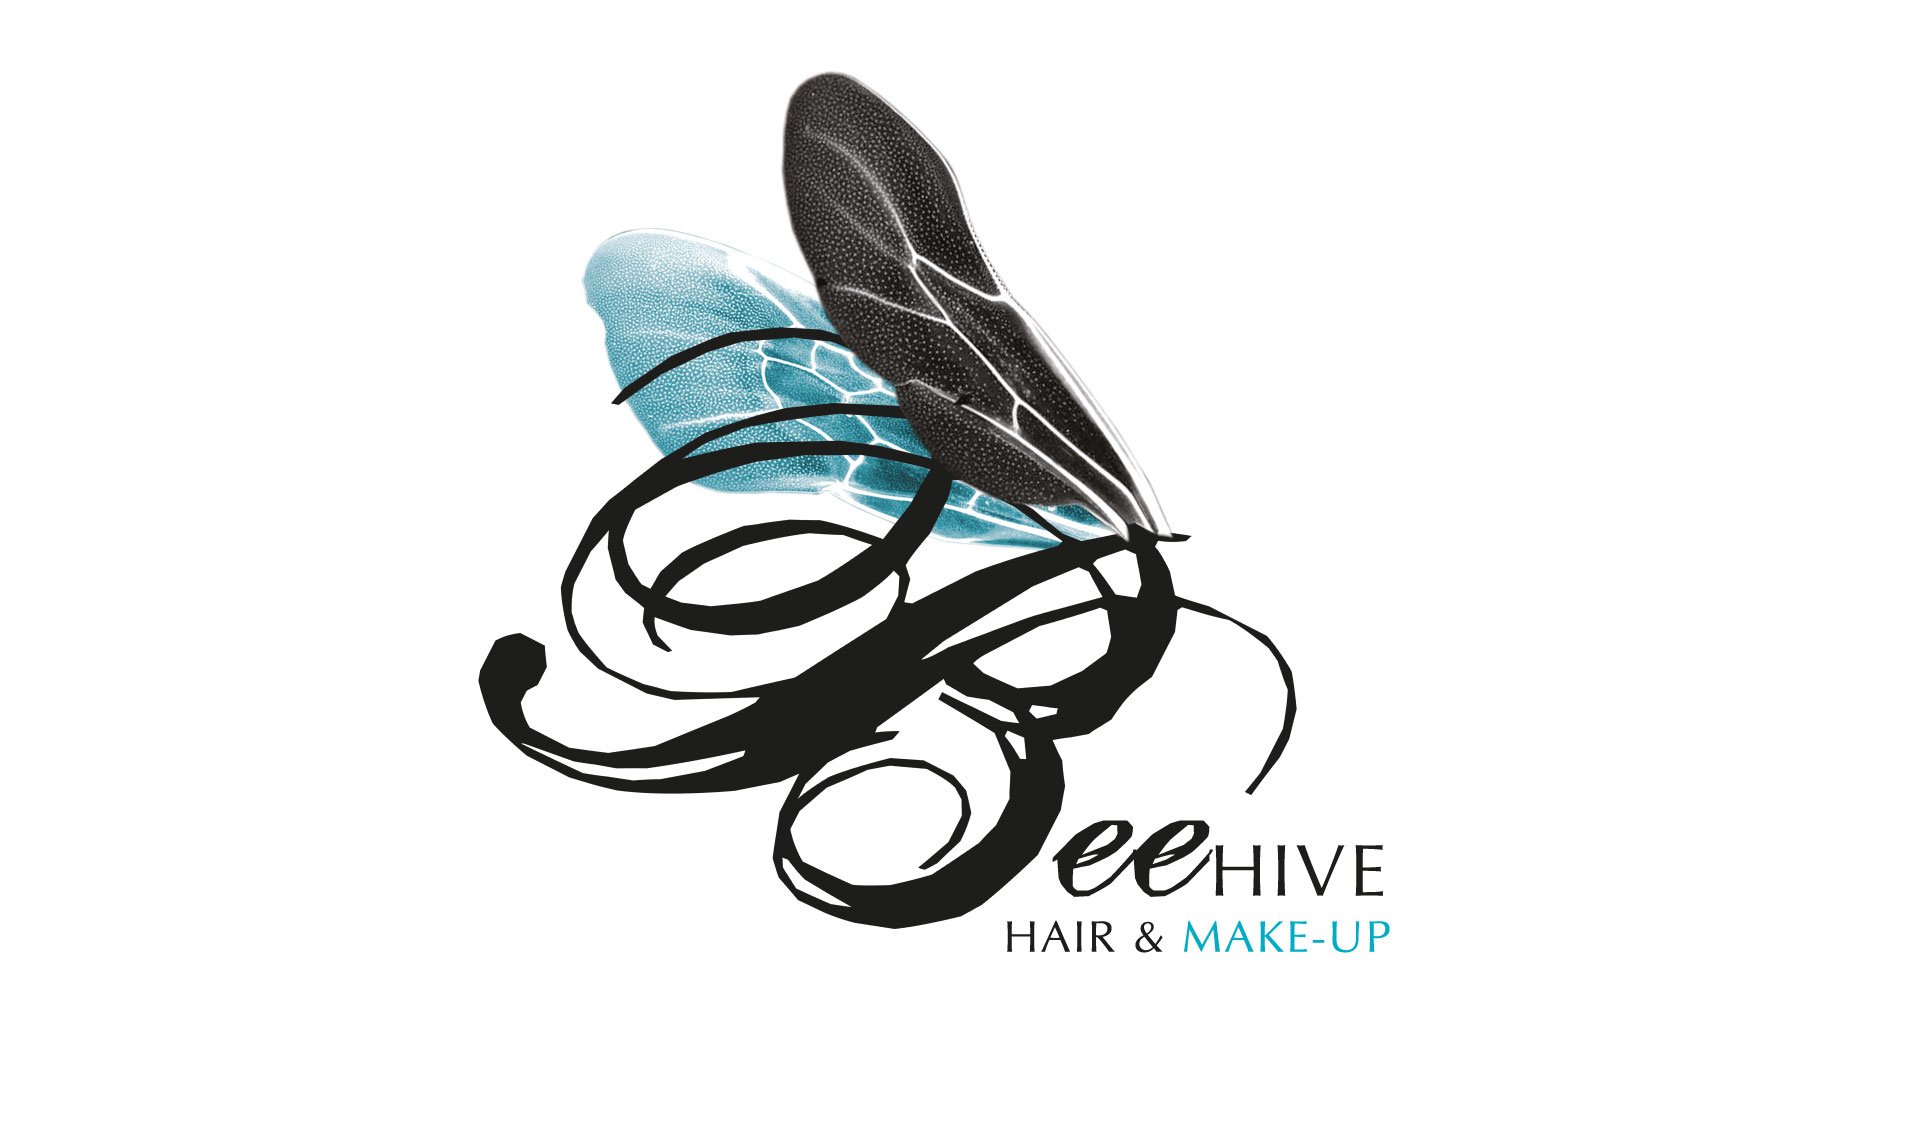 Beehive logo is the letter B with Insect wings